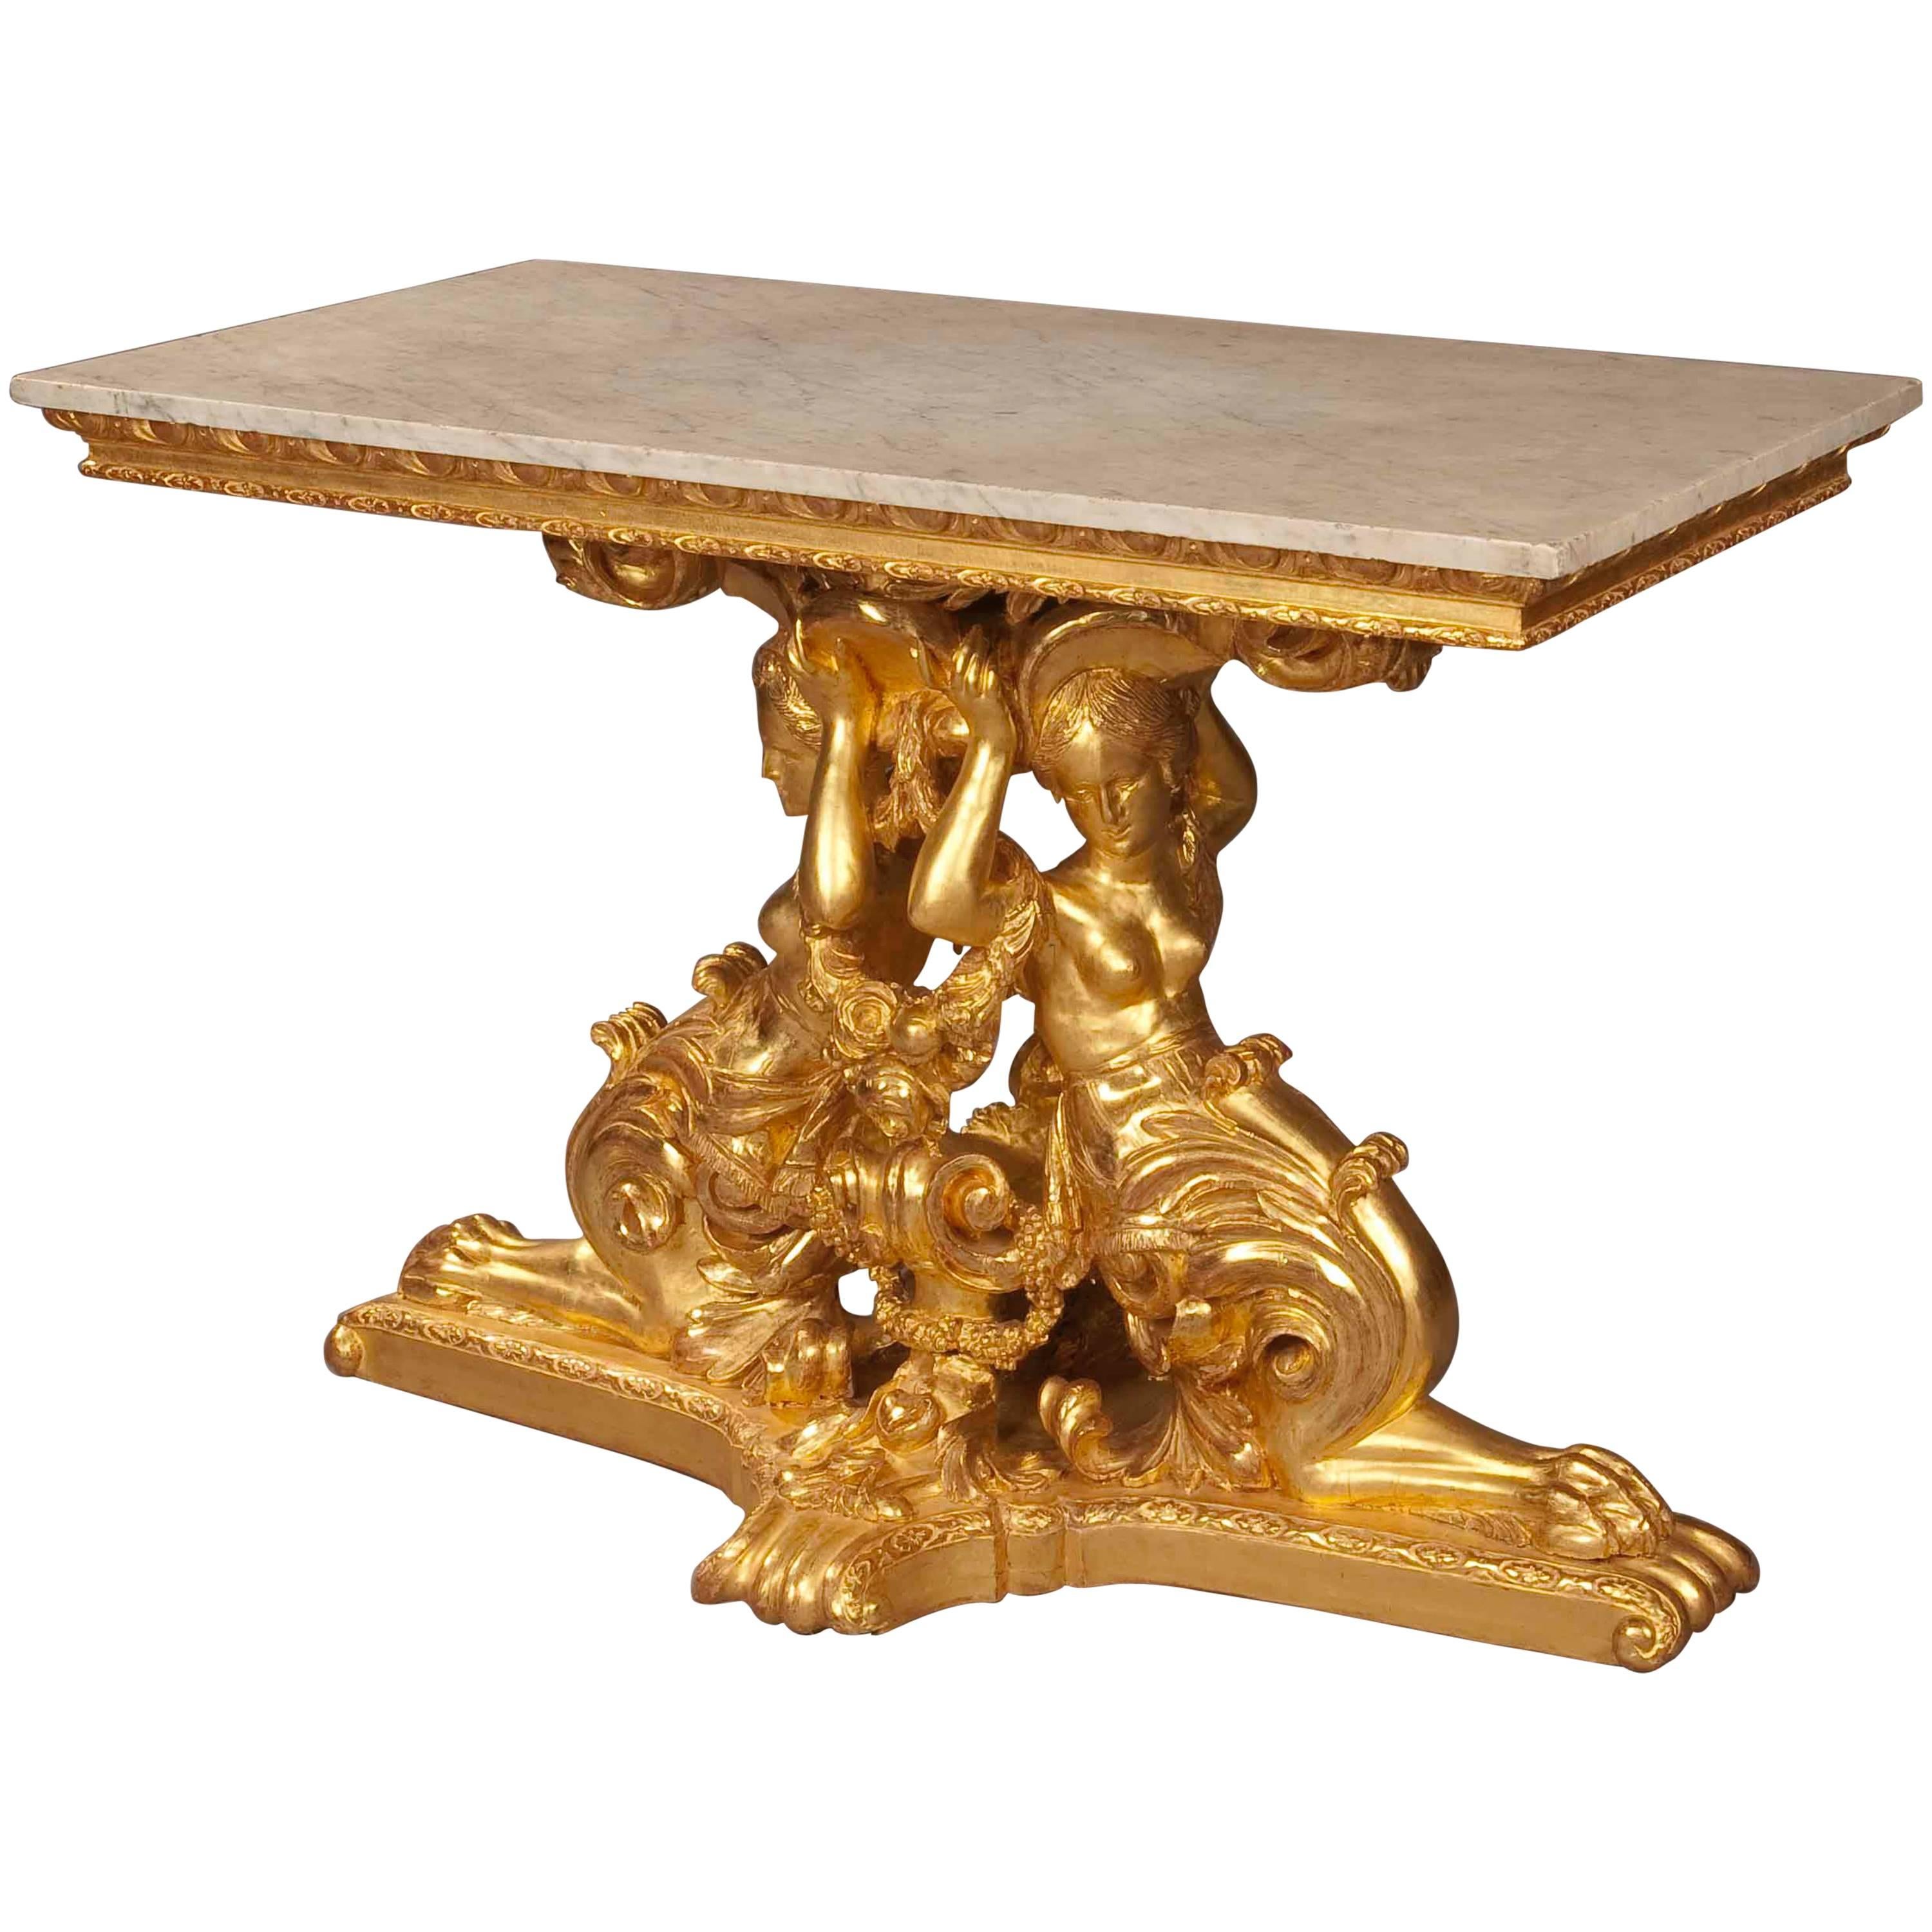 19th Century Carved Giltwood and Marble Italian Table